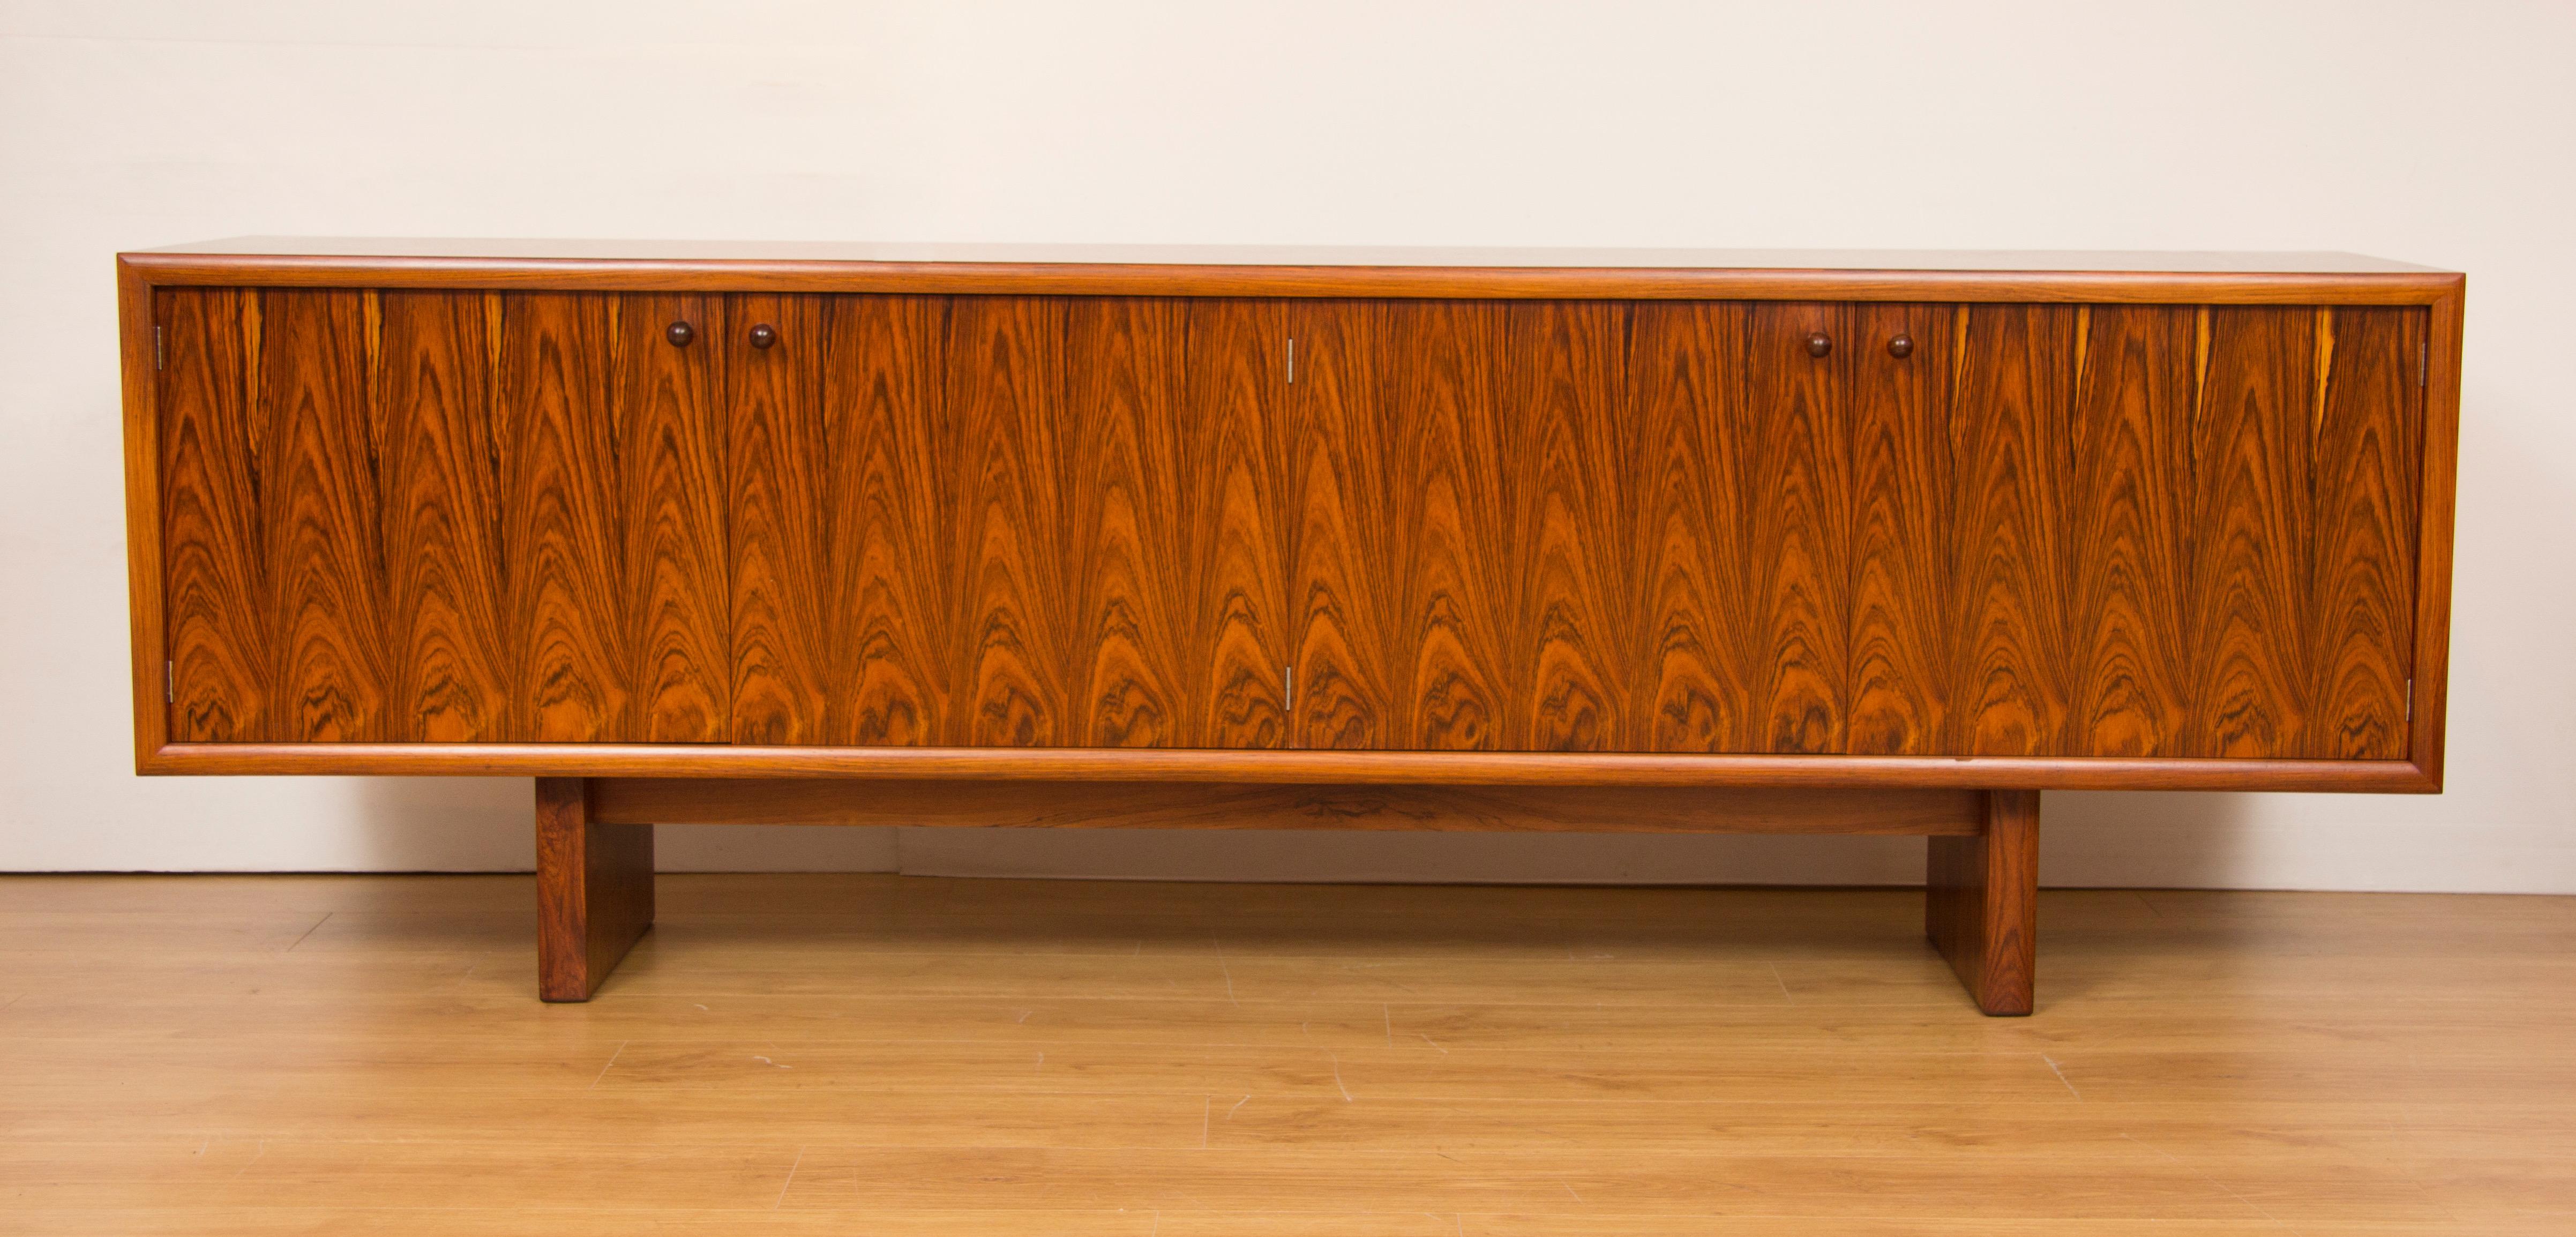 A pair of midcentury rosewood sideboards credenzas.
An extremely rare pair of sideboards design by Martin Hall and produced by Gordon Russell in the most stunning rosewood with contrasting Maple interior.
Model GR75
Measures: 71 cm H 213.5 cm W